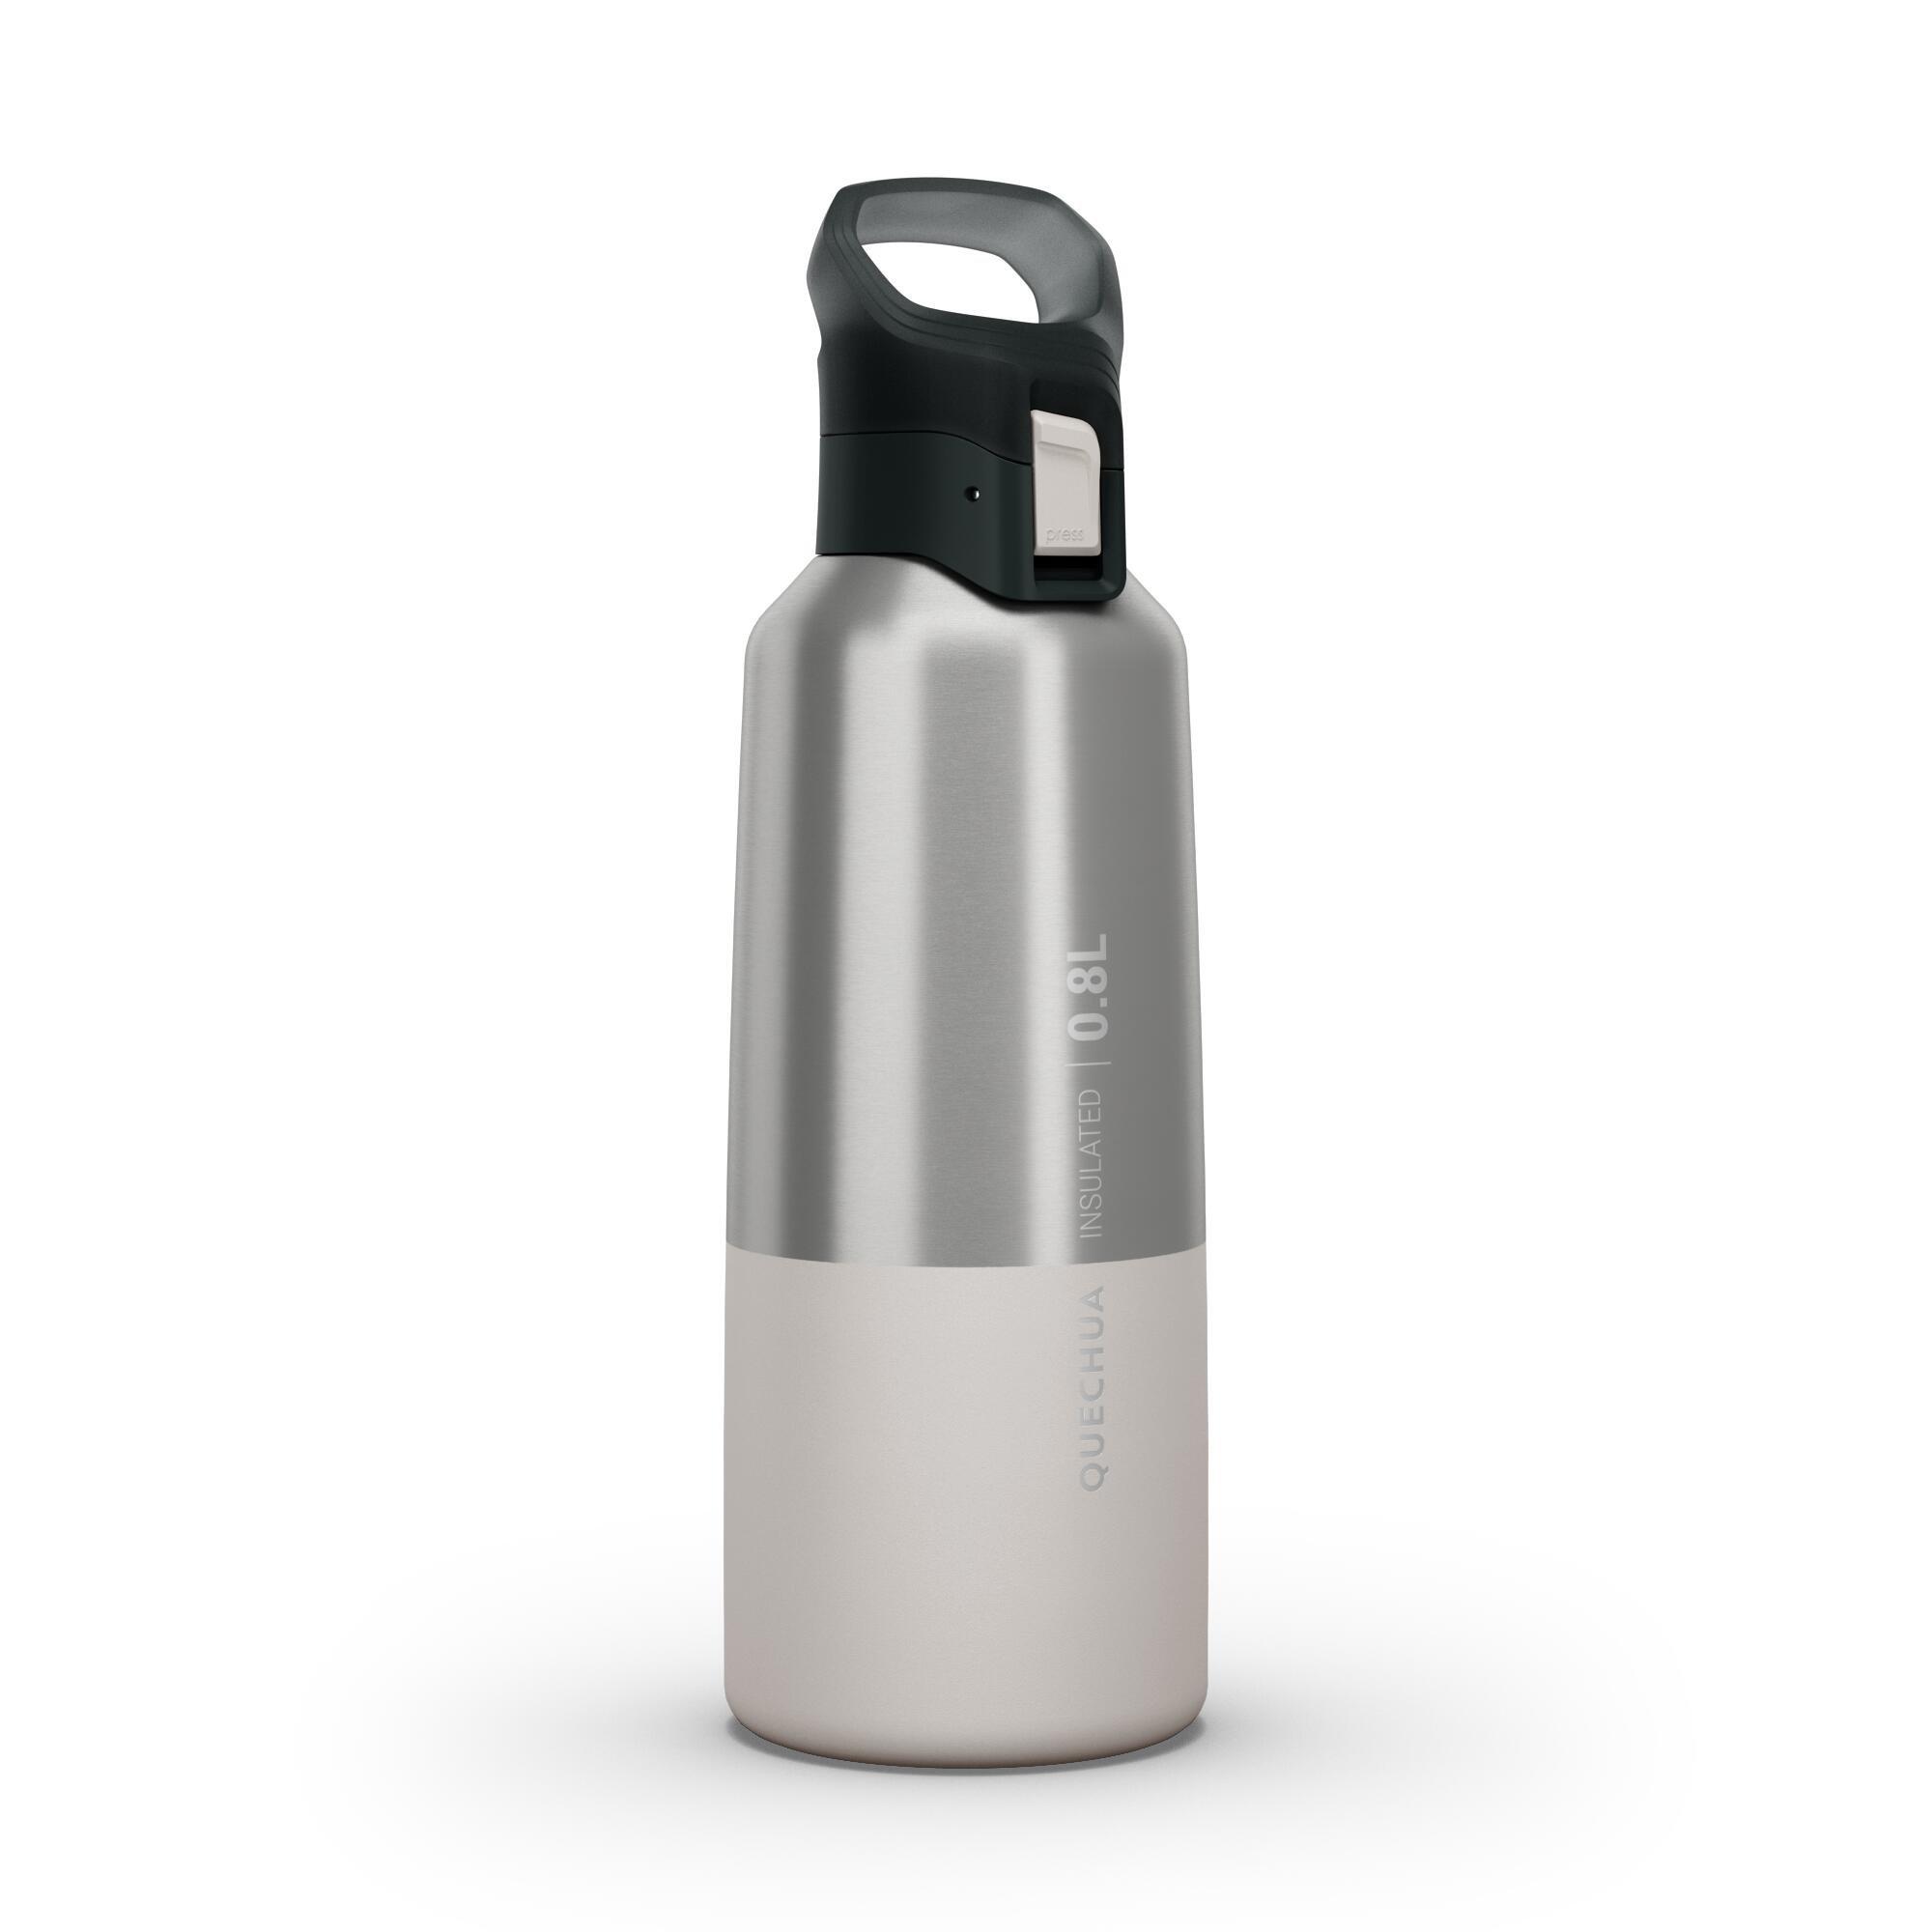 Decathlon Isothermal Stainless Steel Hiking Flask Mh500 0.8 L